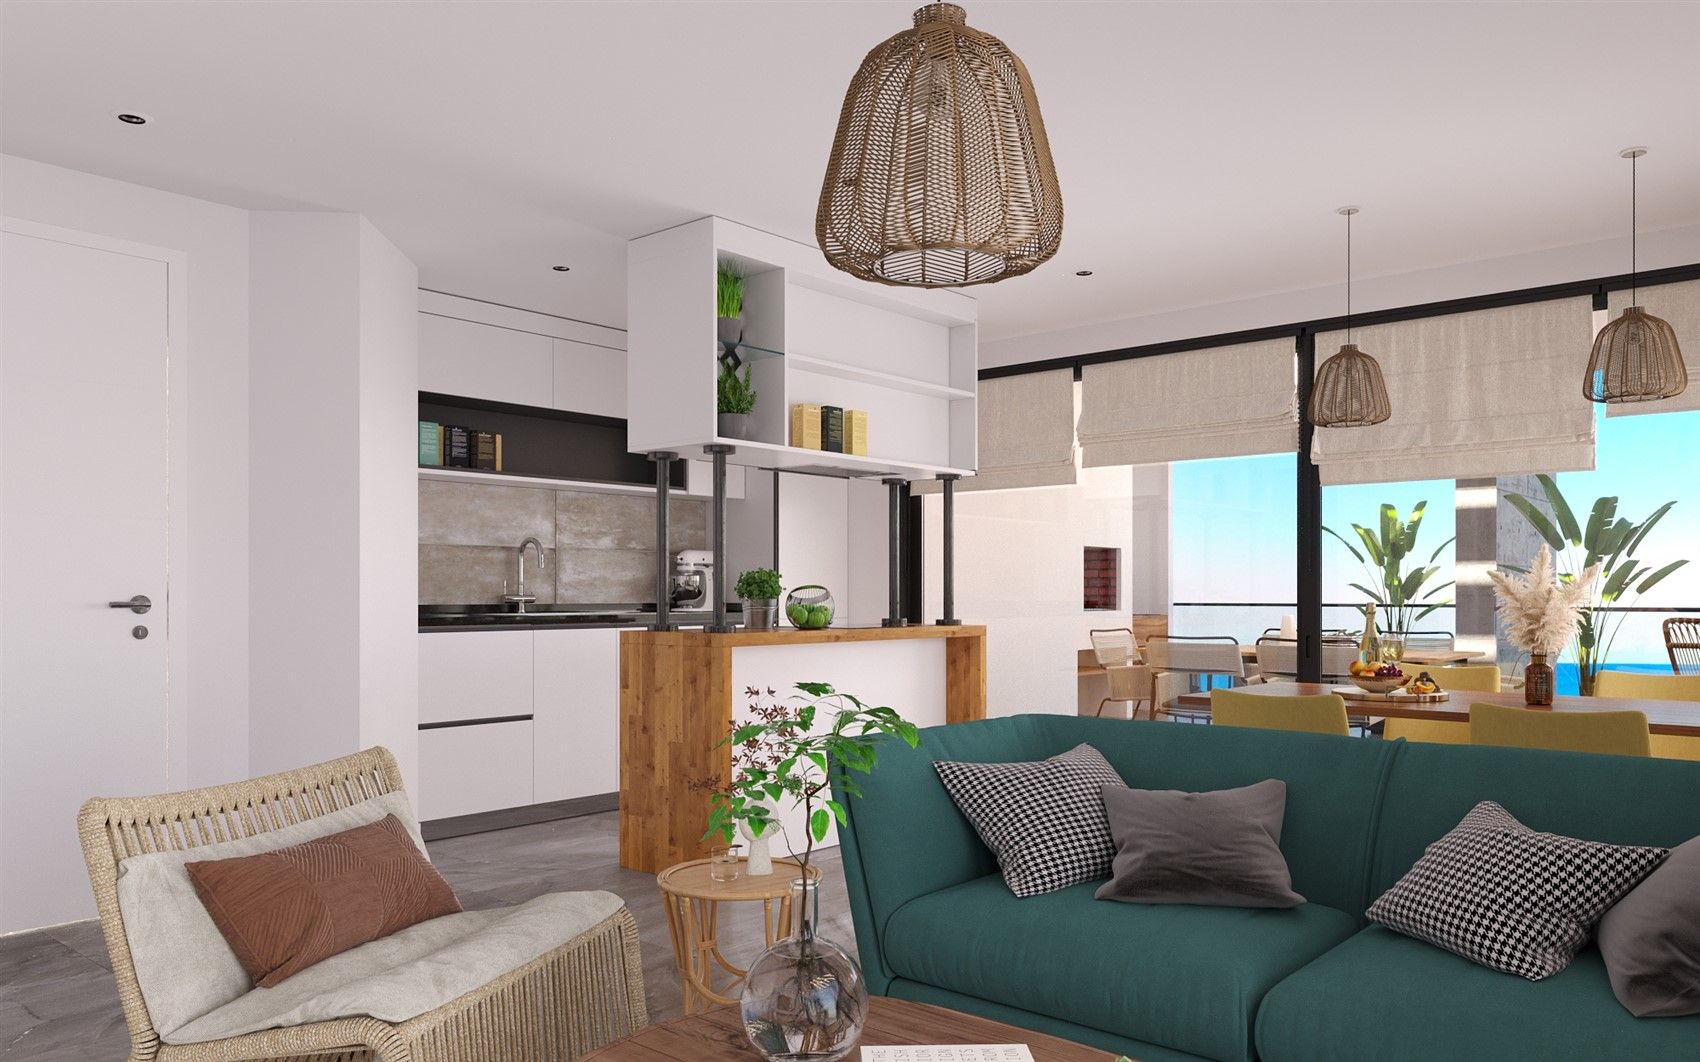 New complex on the coast of Morphou Bay - Northern Cyprus